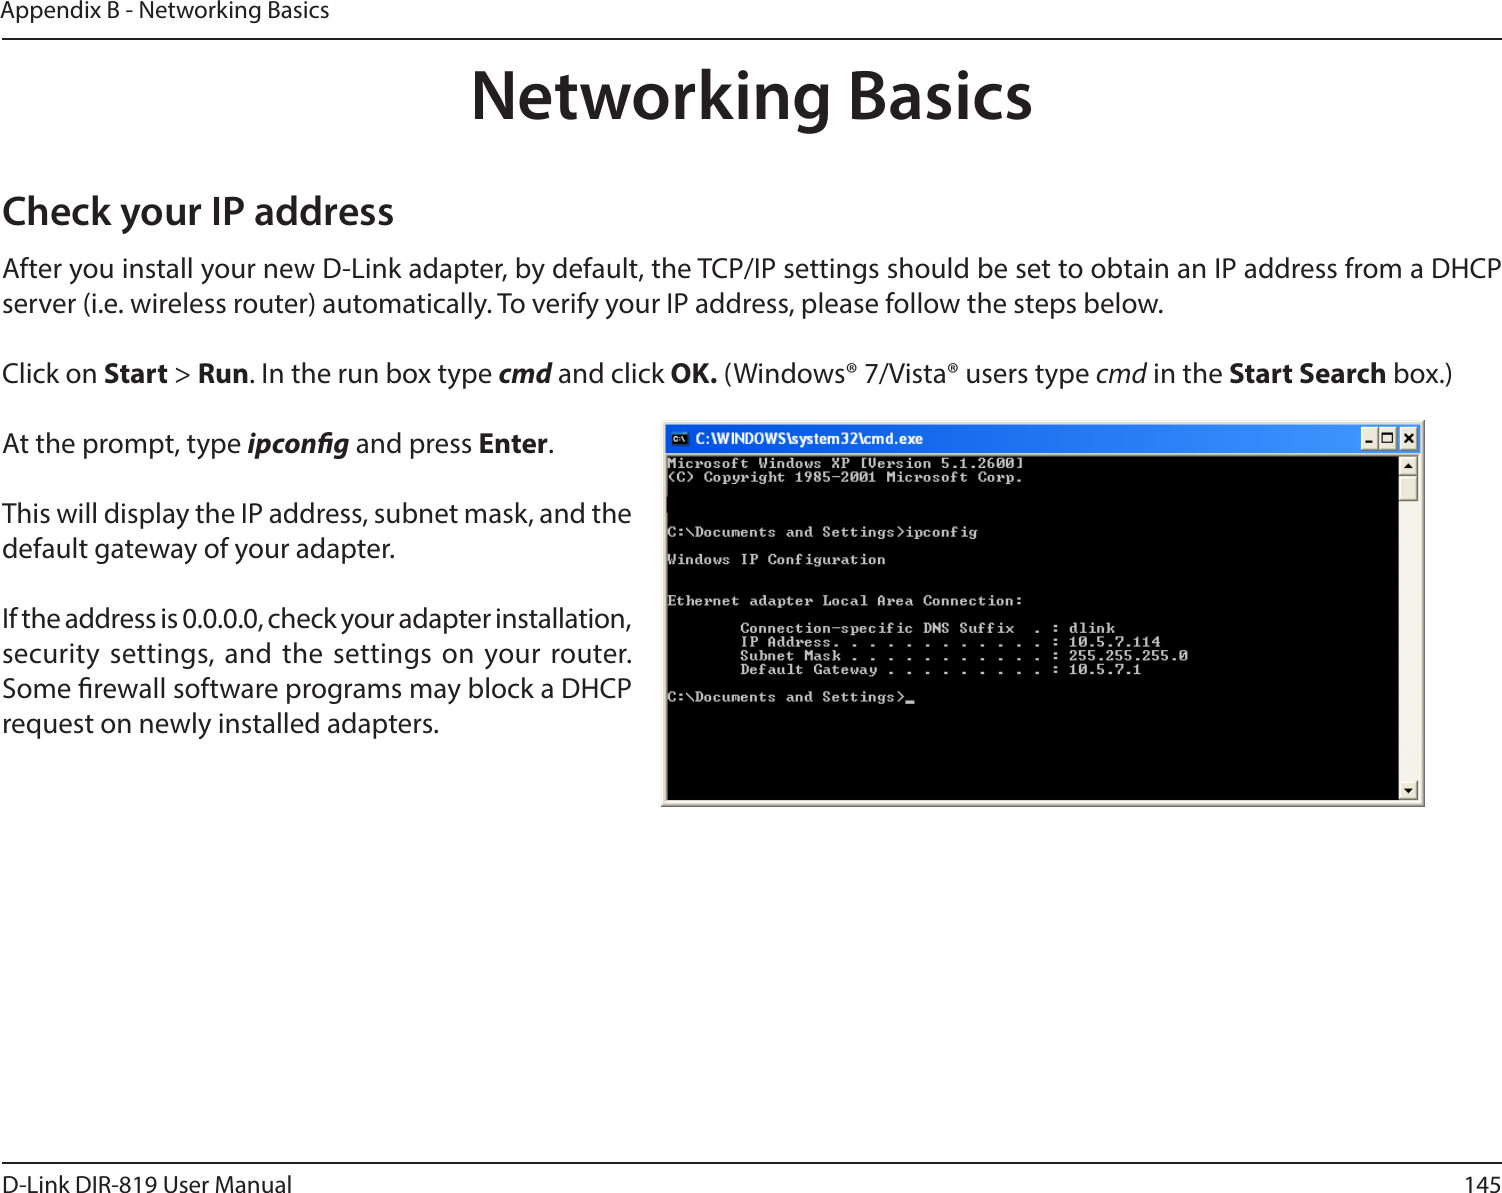 145D-Link DIR-819 User ManualAppendix B - Networking BasicsNetworking BasicsCheck your IP addressAfter you install your new D-Link adapter, by default, the TCP/IP settings should be set to obtain an IP address from a DHCP server (i.e. wireless router) automatically. To verify your IP address, please follow the steps below.Click on Start &gt; Run. In the run box type cmd and click OK. (Windows® 7/Vista® users type cmd in the Start Search box.)At the prompt, type ipcong and press Enter.This will display the IP address, subnet mask, and the default gateway of your adapter.If the address is 0.0.0.0, check your adapter installation, security settings, and the settings on your router. Some rewall software programs may block a DHCP request on newly installed adapters. 